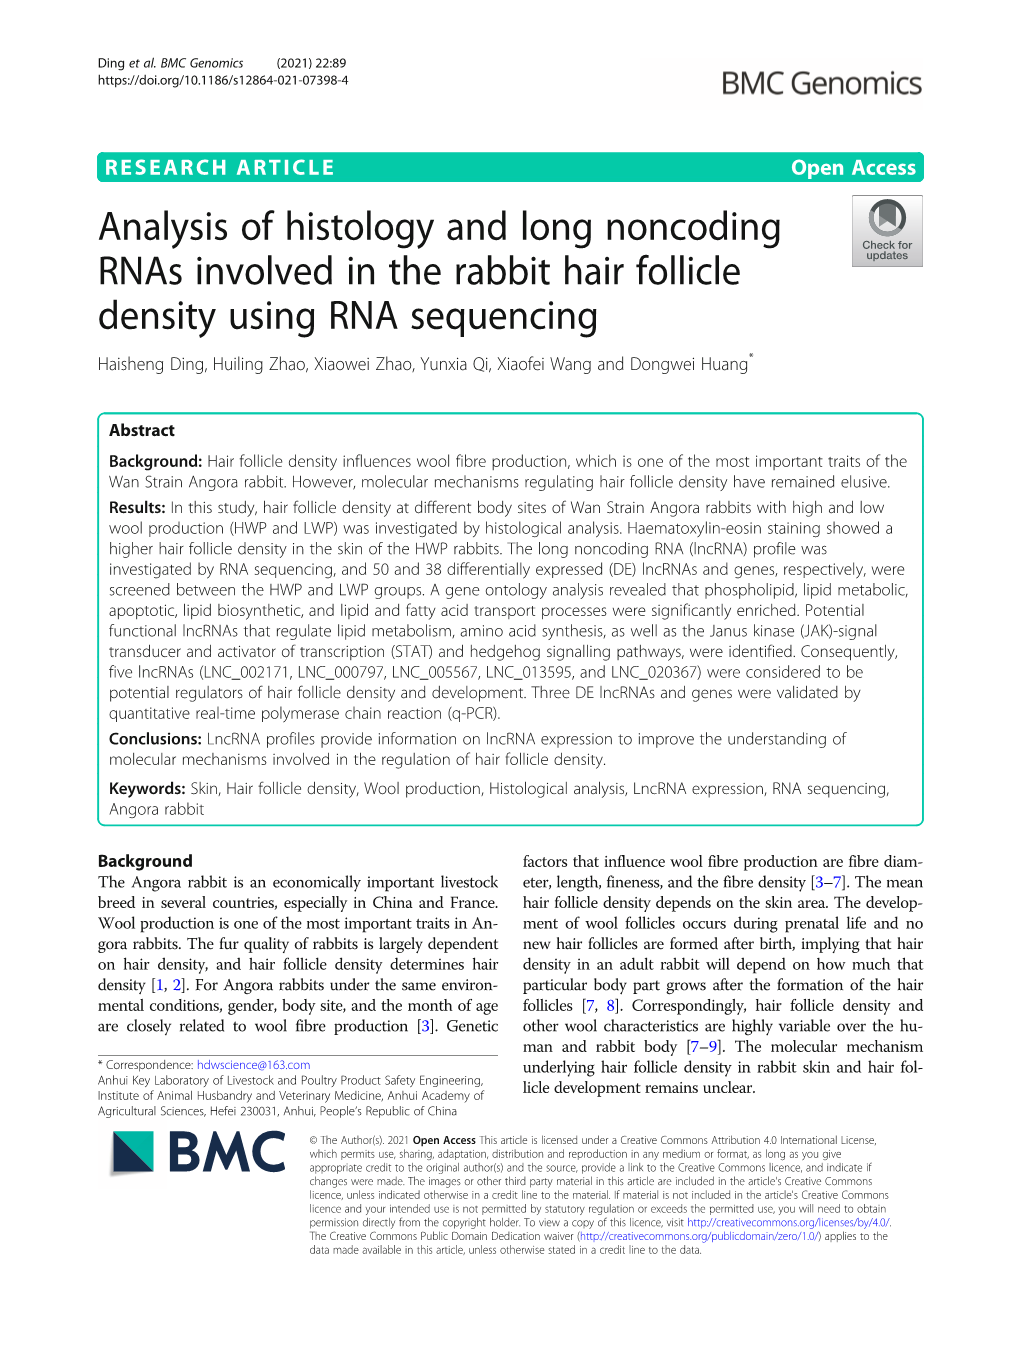 Analysis of Histology and Long Noncoding Rnas Involved in the Rabbit Hair Follicle Density Using RNA Sequencing